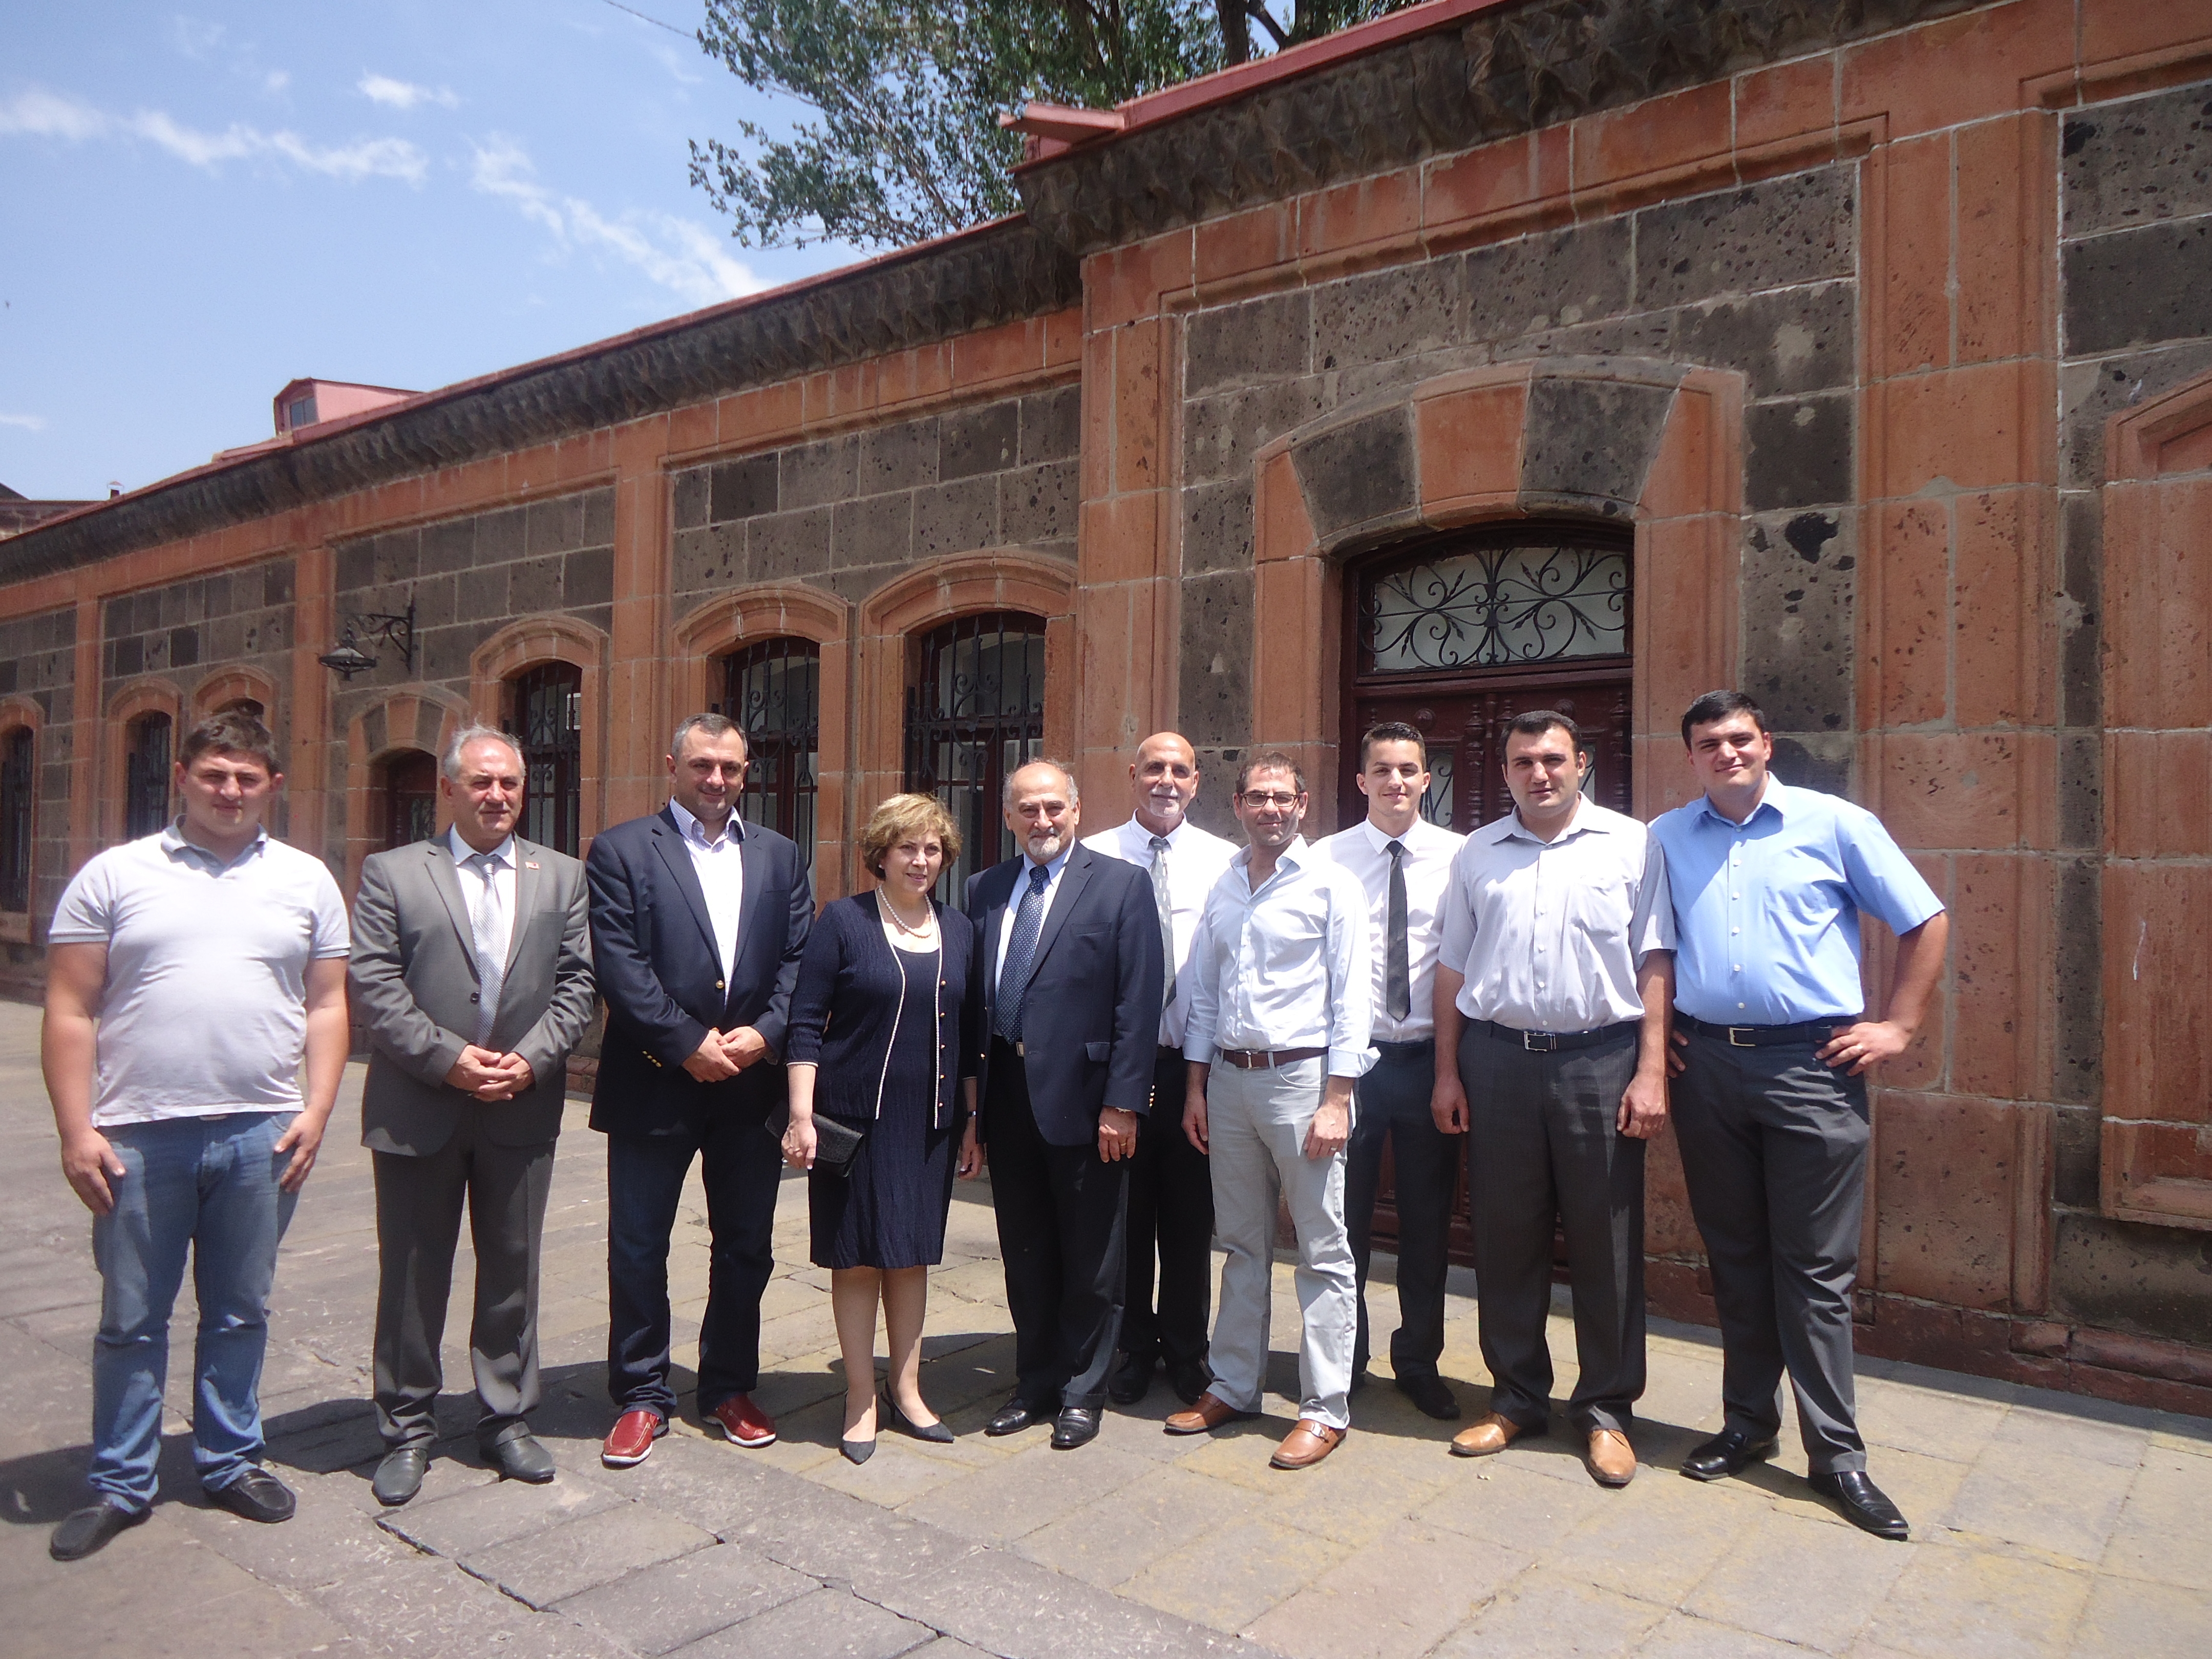 Group of doctors from U.S. visits Gyumri